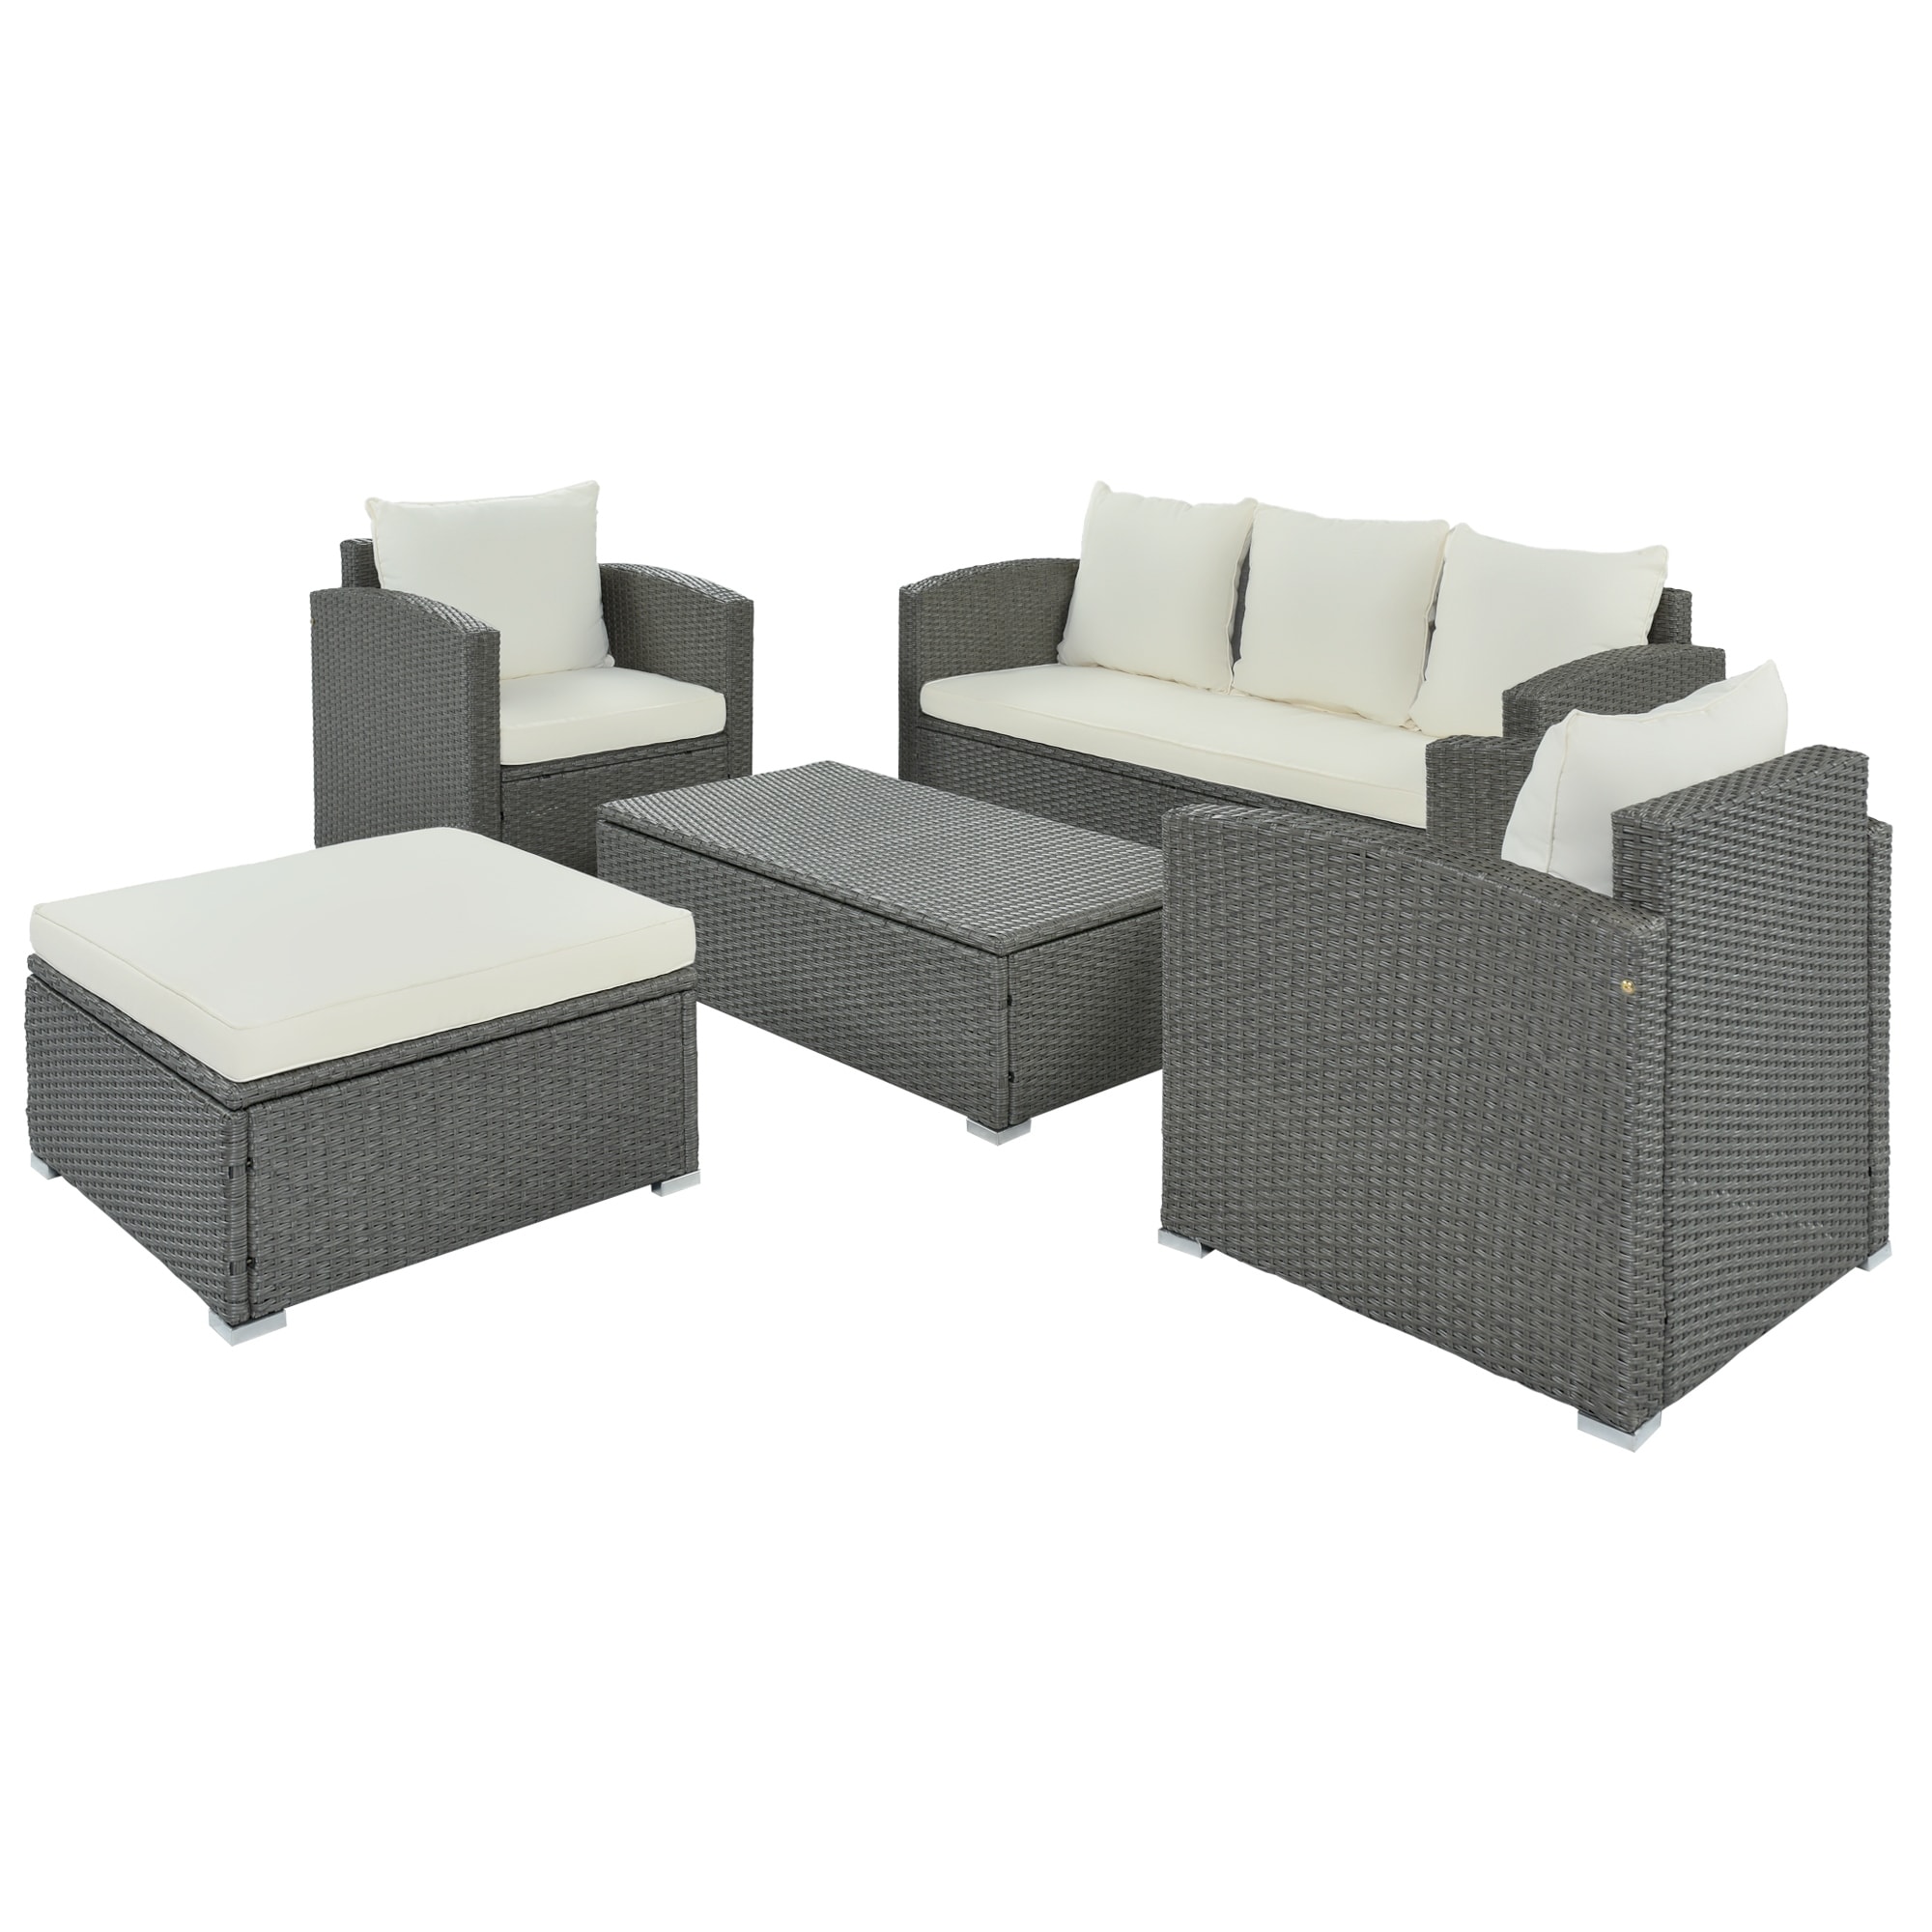 Topmax Outdoor Patio 5-piece All-weather Pe Wicker Rattan Sectional Sofa Set With Multifunctional Storage Table And Ottoman